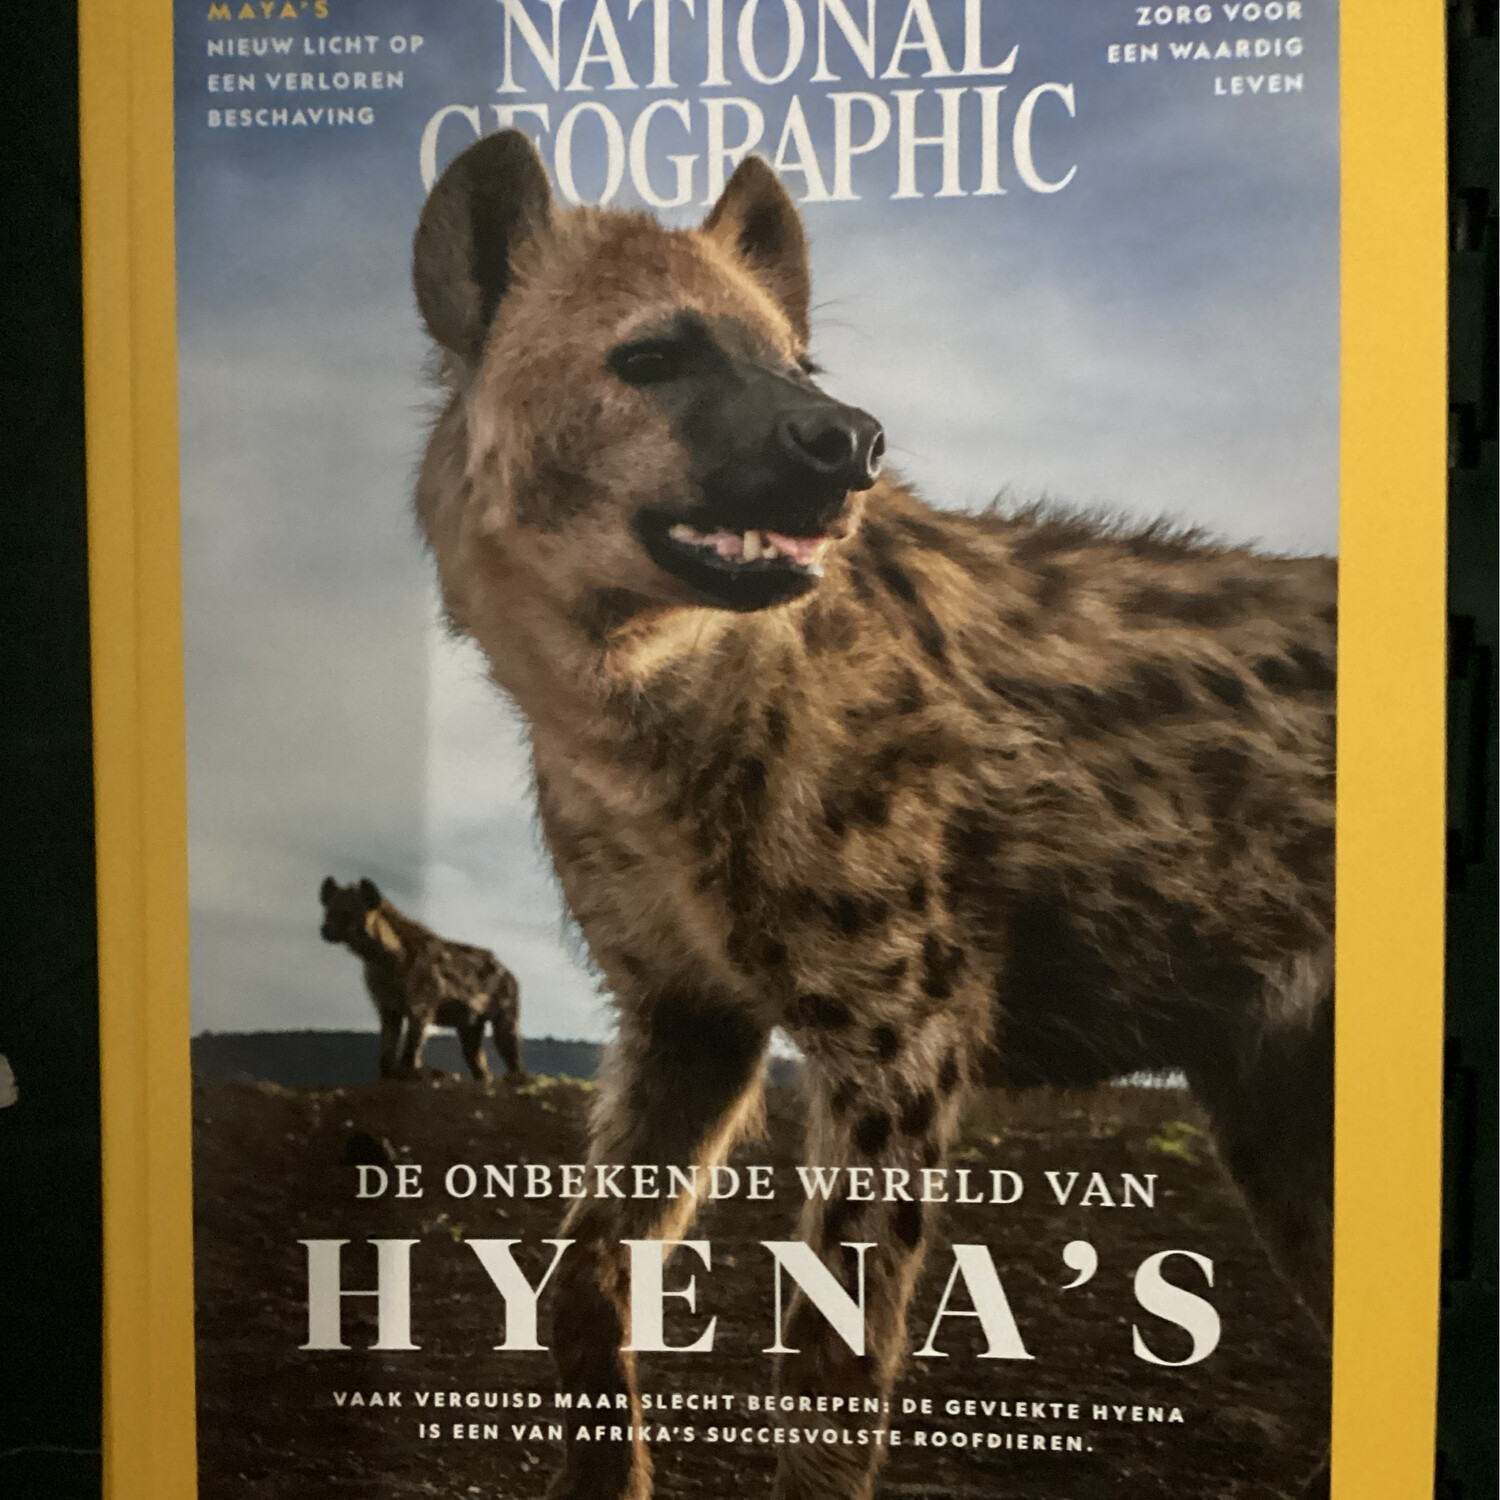 NATIONAL GEOGRAPHIC NL 3